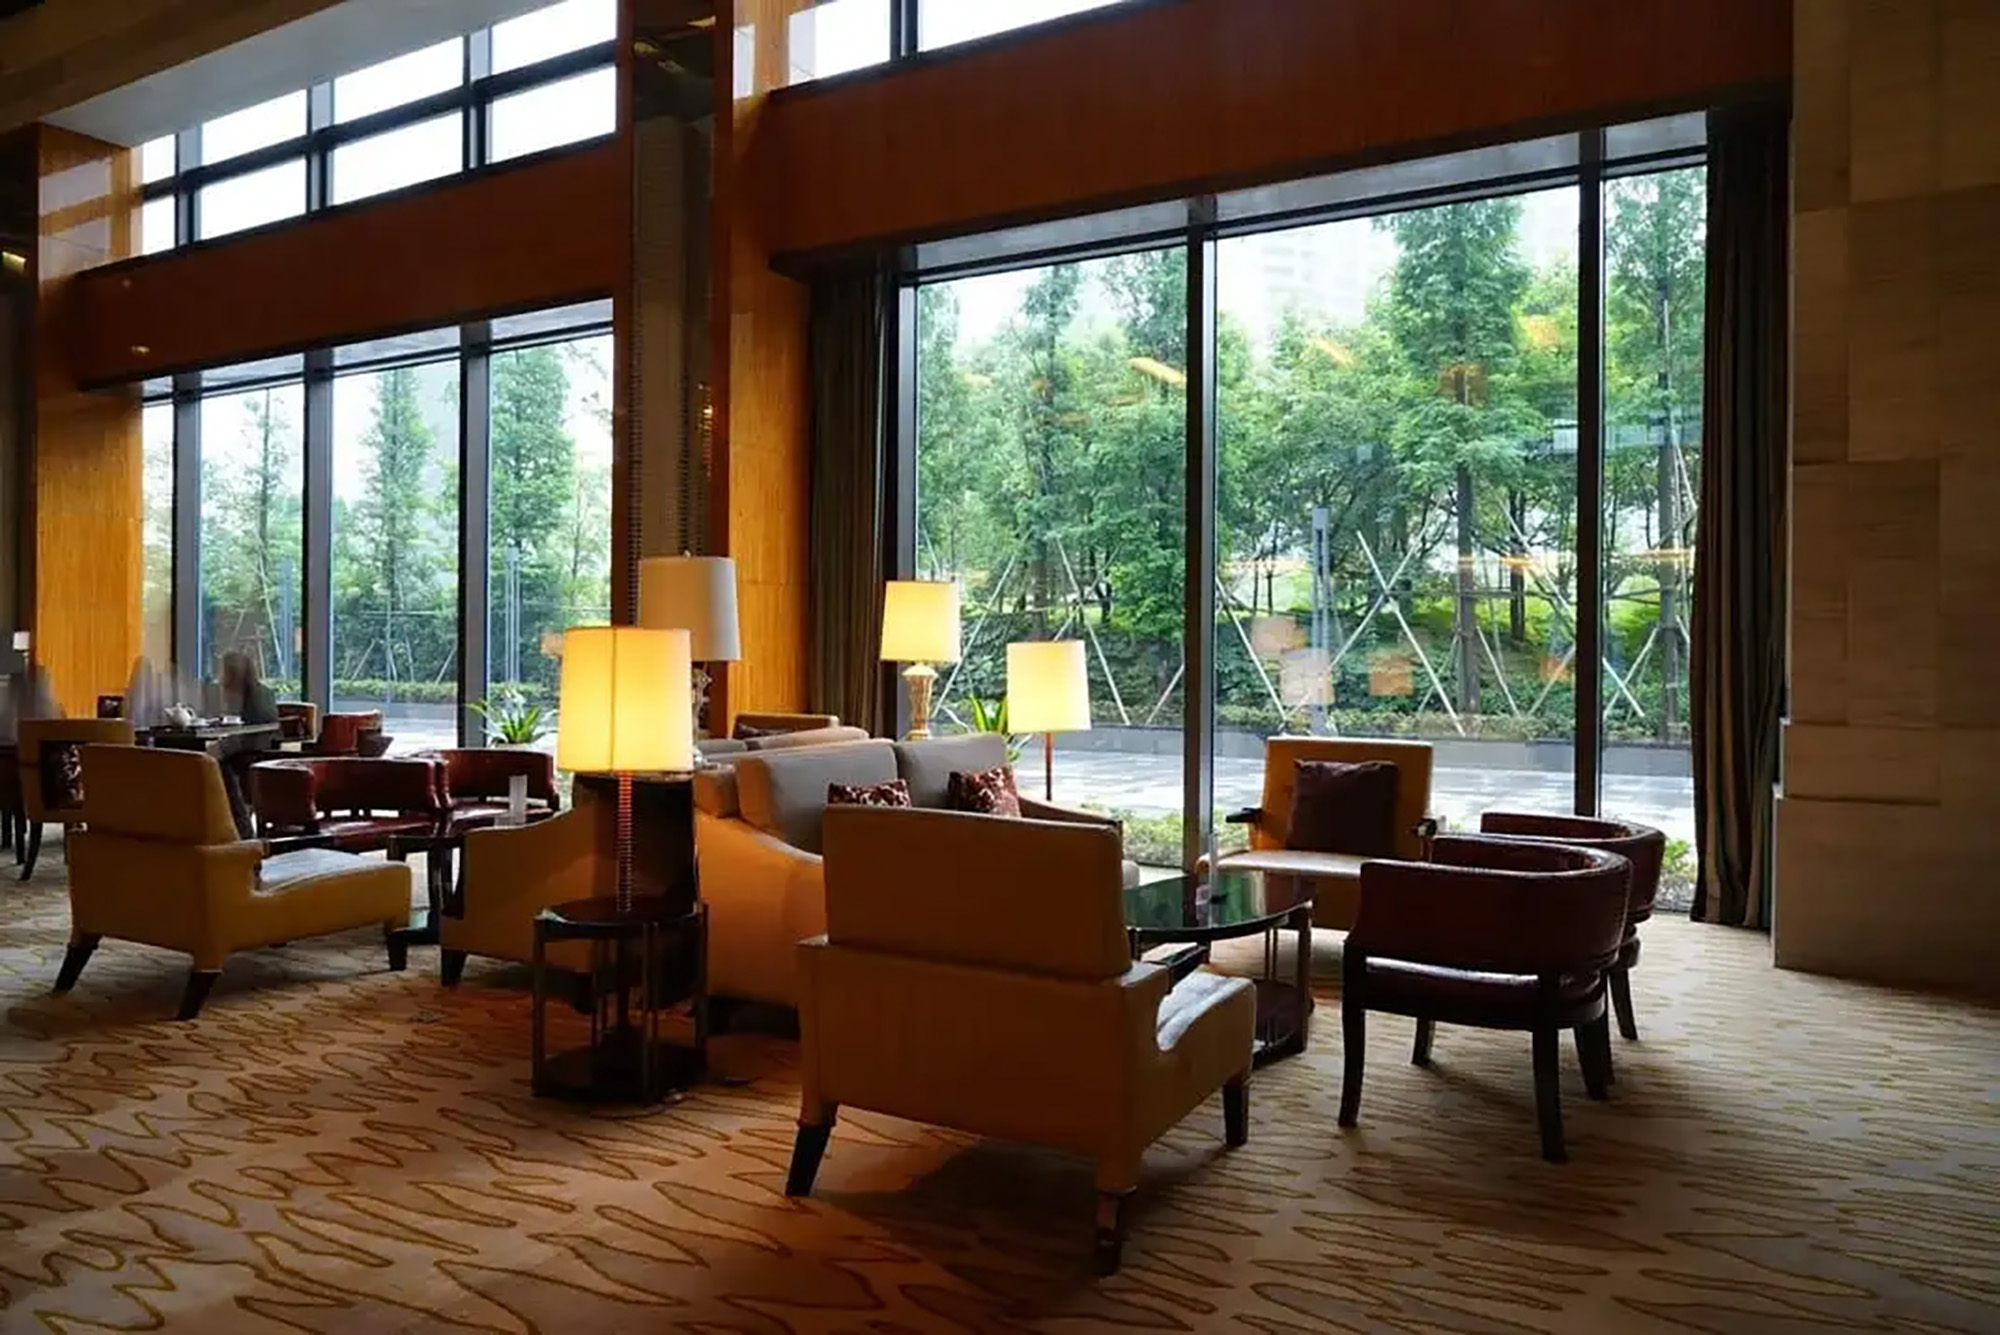 Hotel lobby with floor-to-ceiling glass windows.